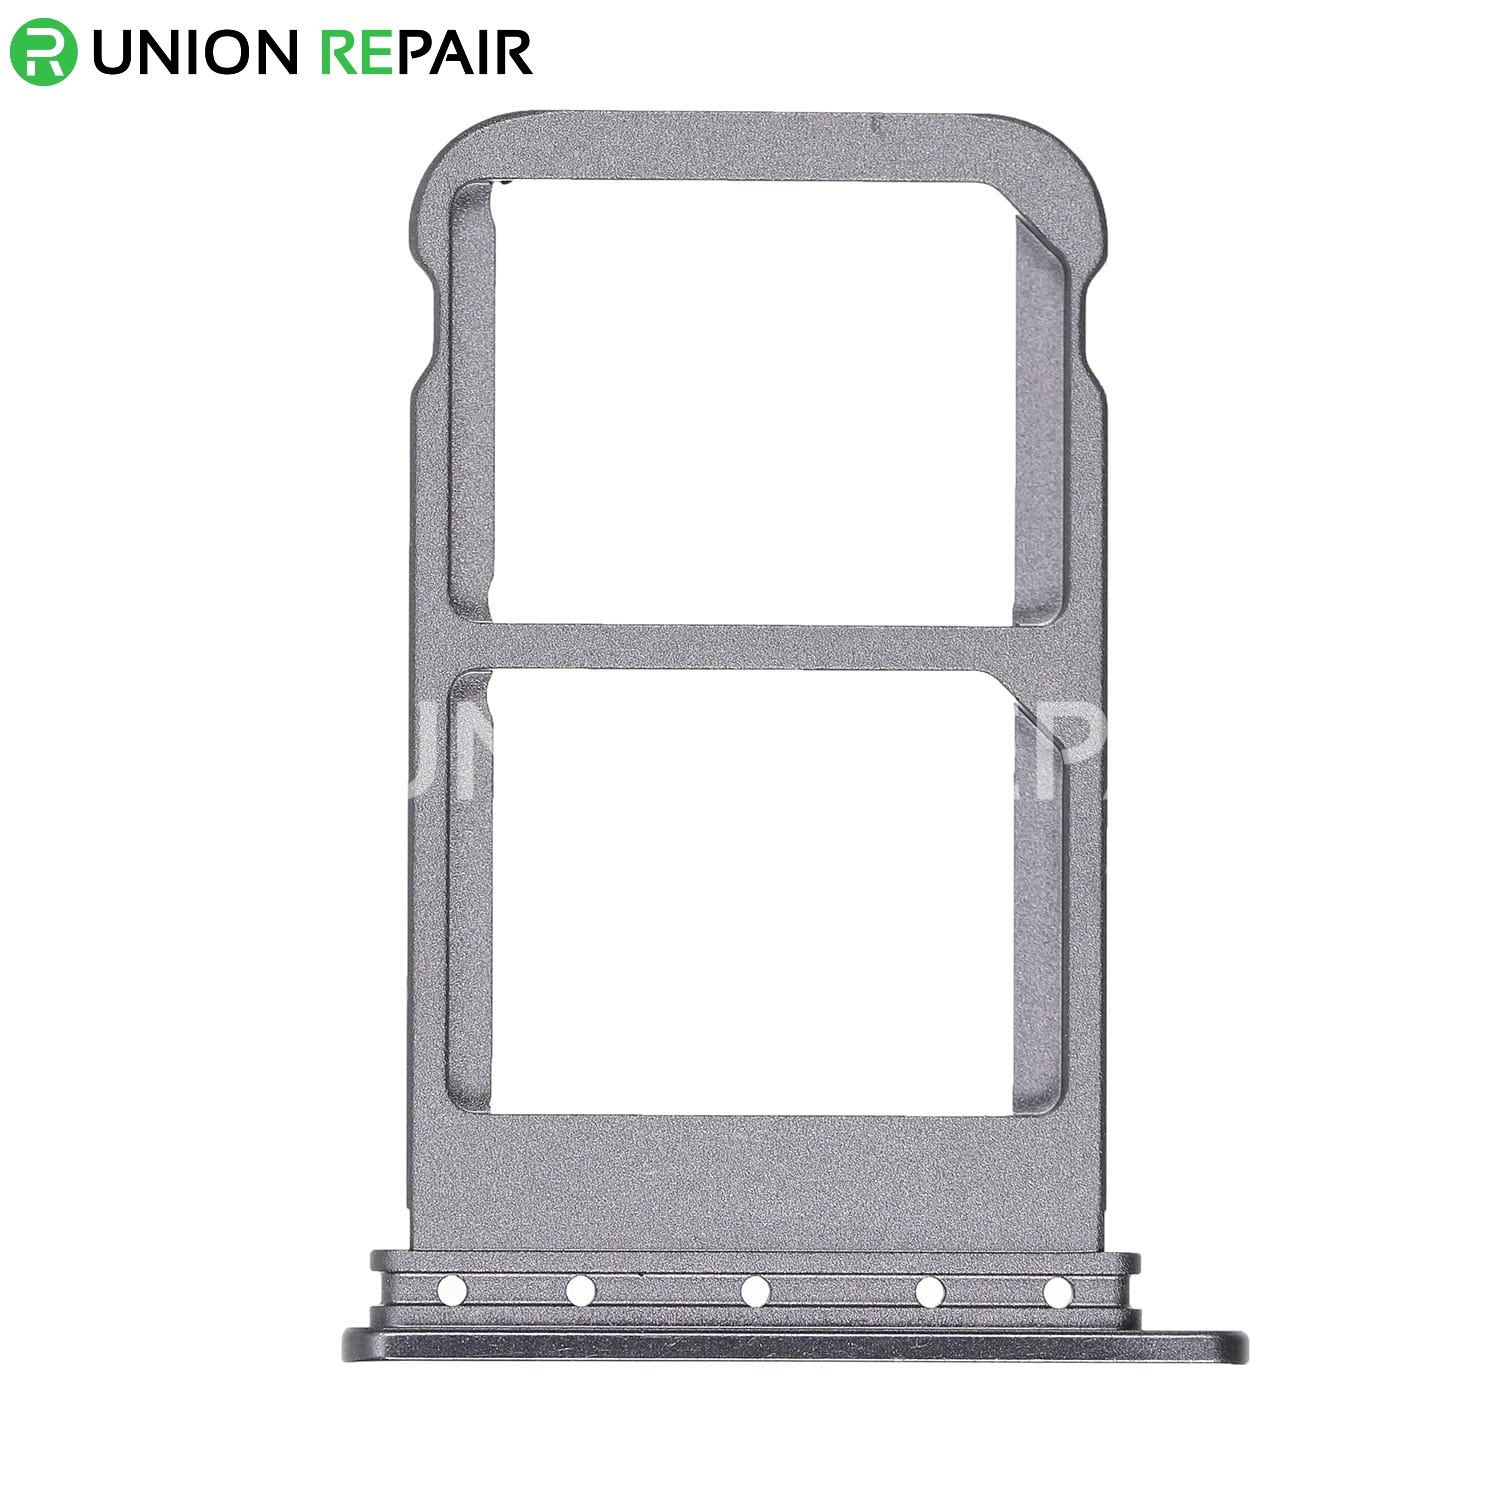 Replacement for Huawei Mate 10 Pro SIM Card Tray - Titanium Grey